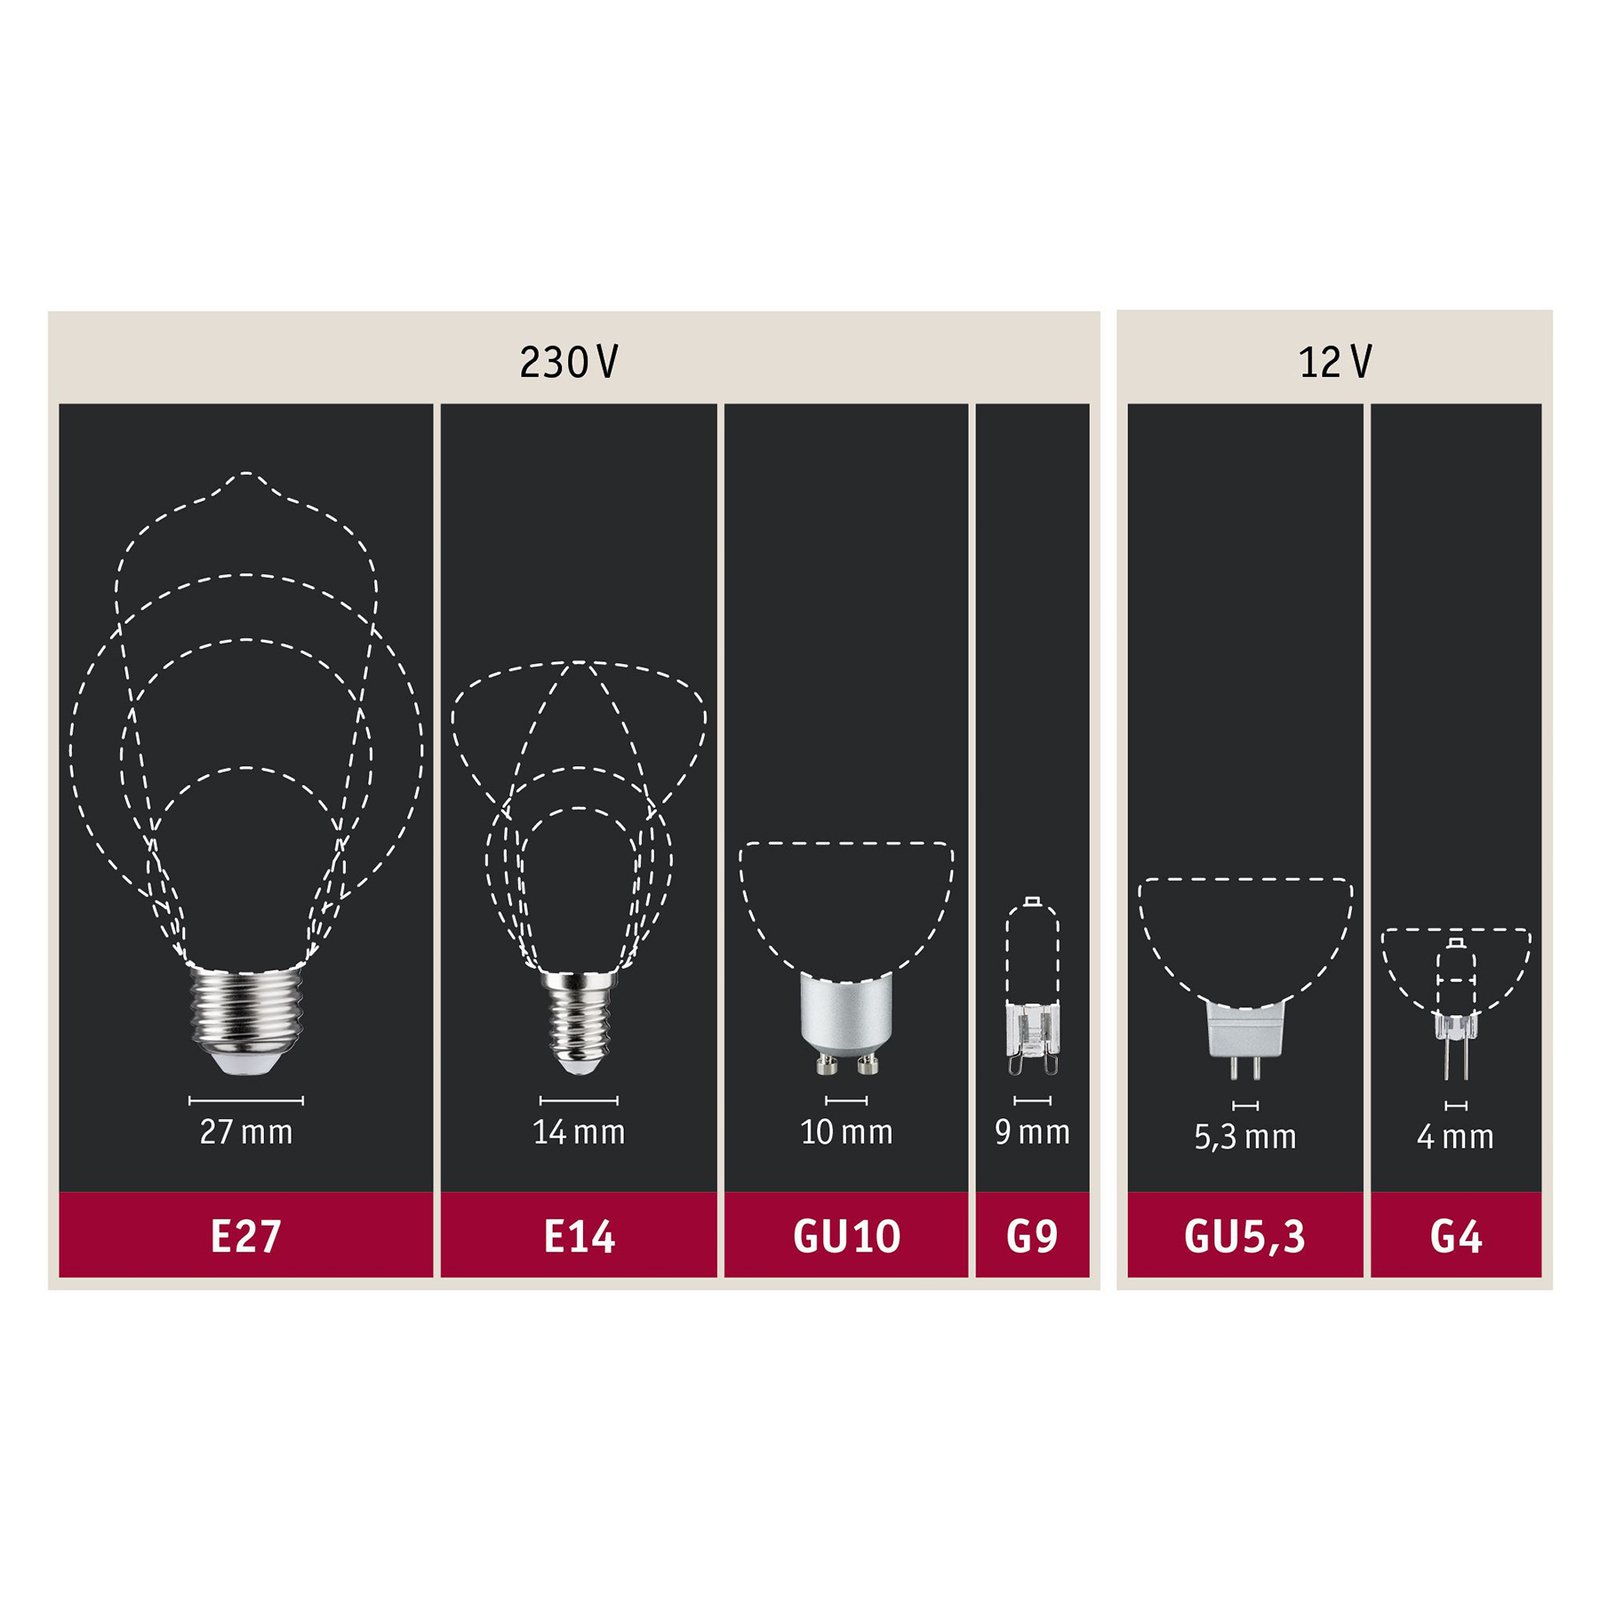 Paulmann LED candle E14 5W Filament 3-step dimmable